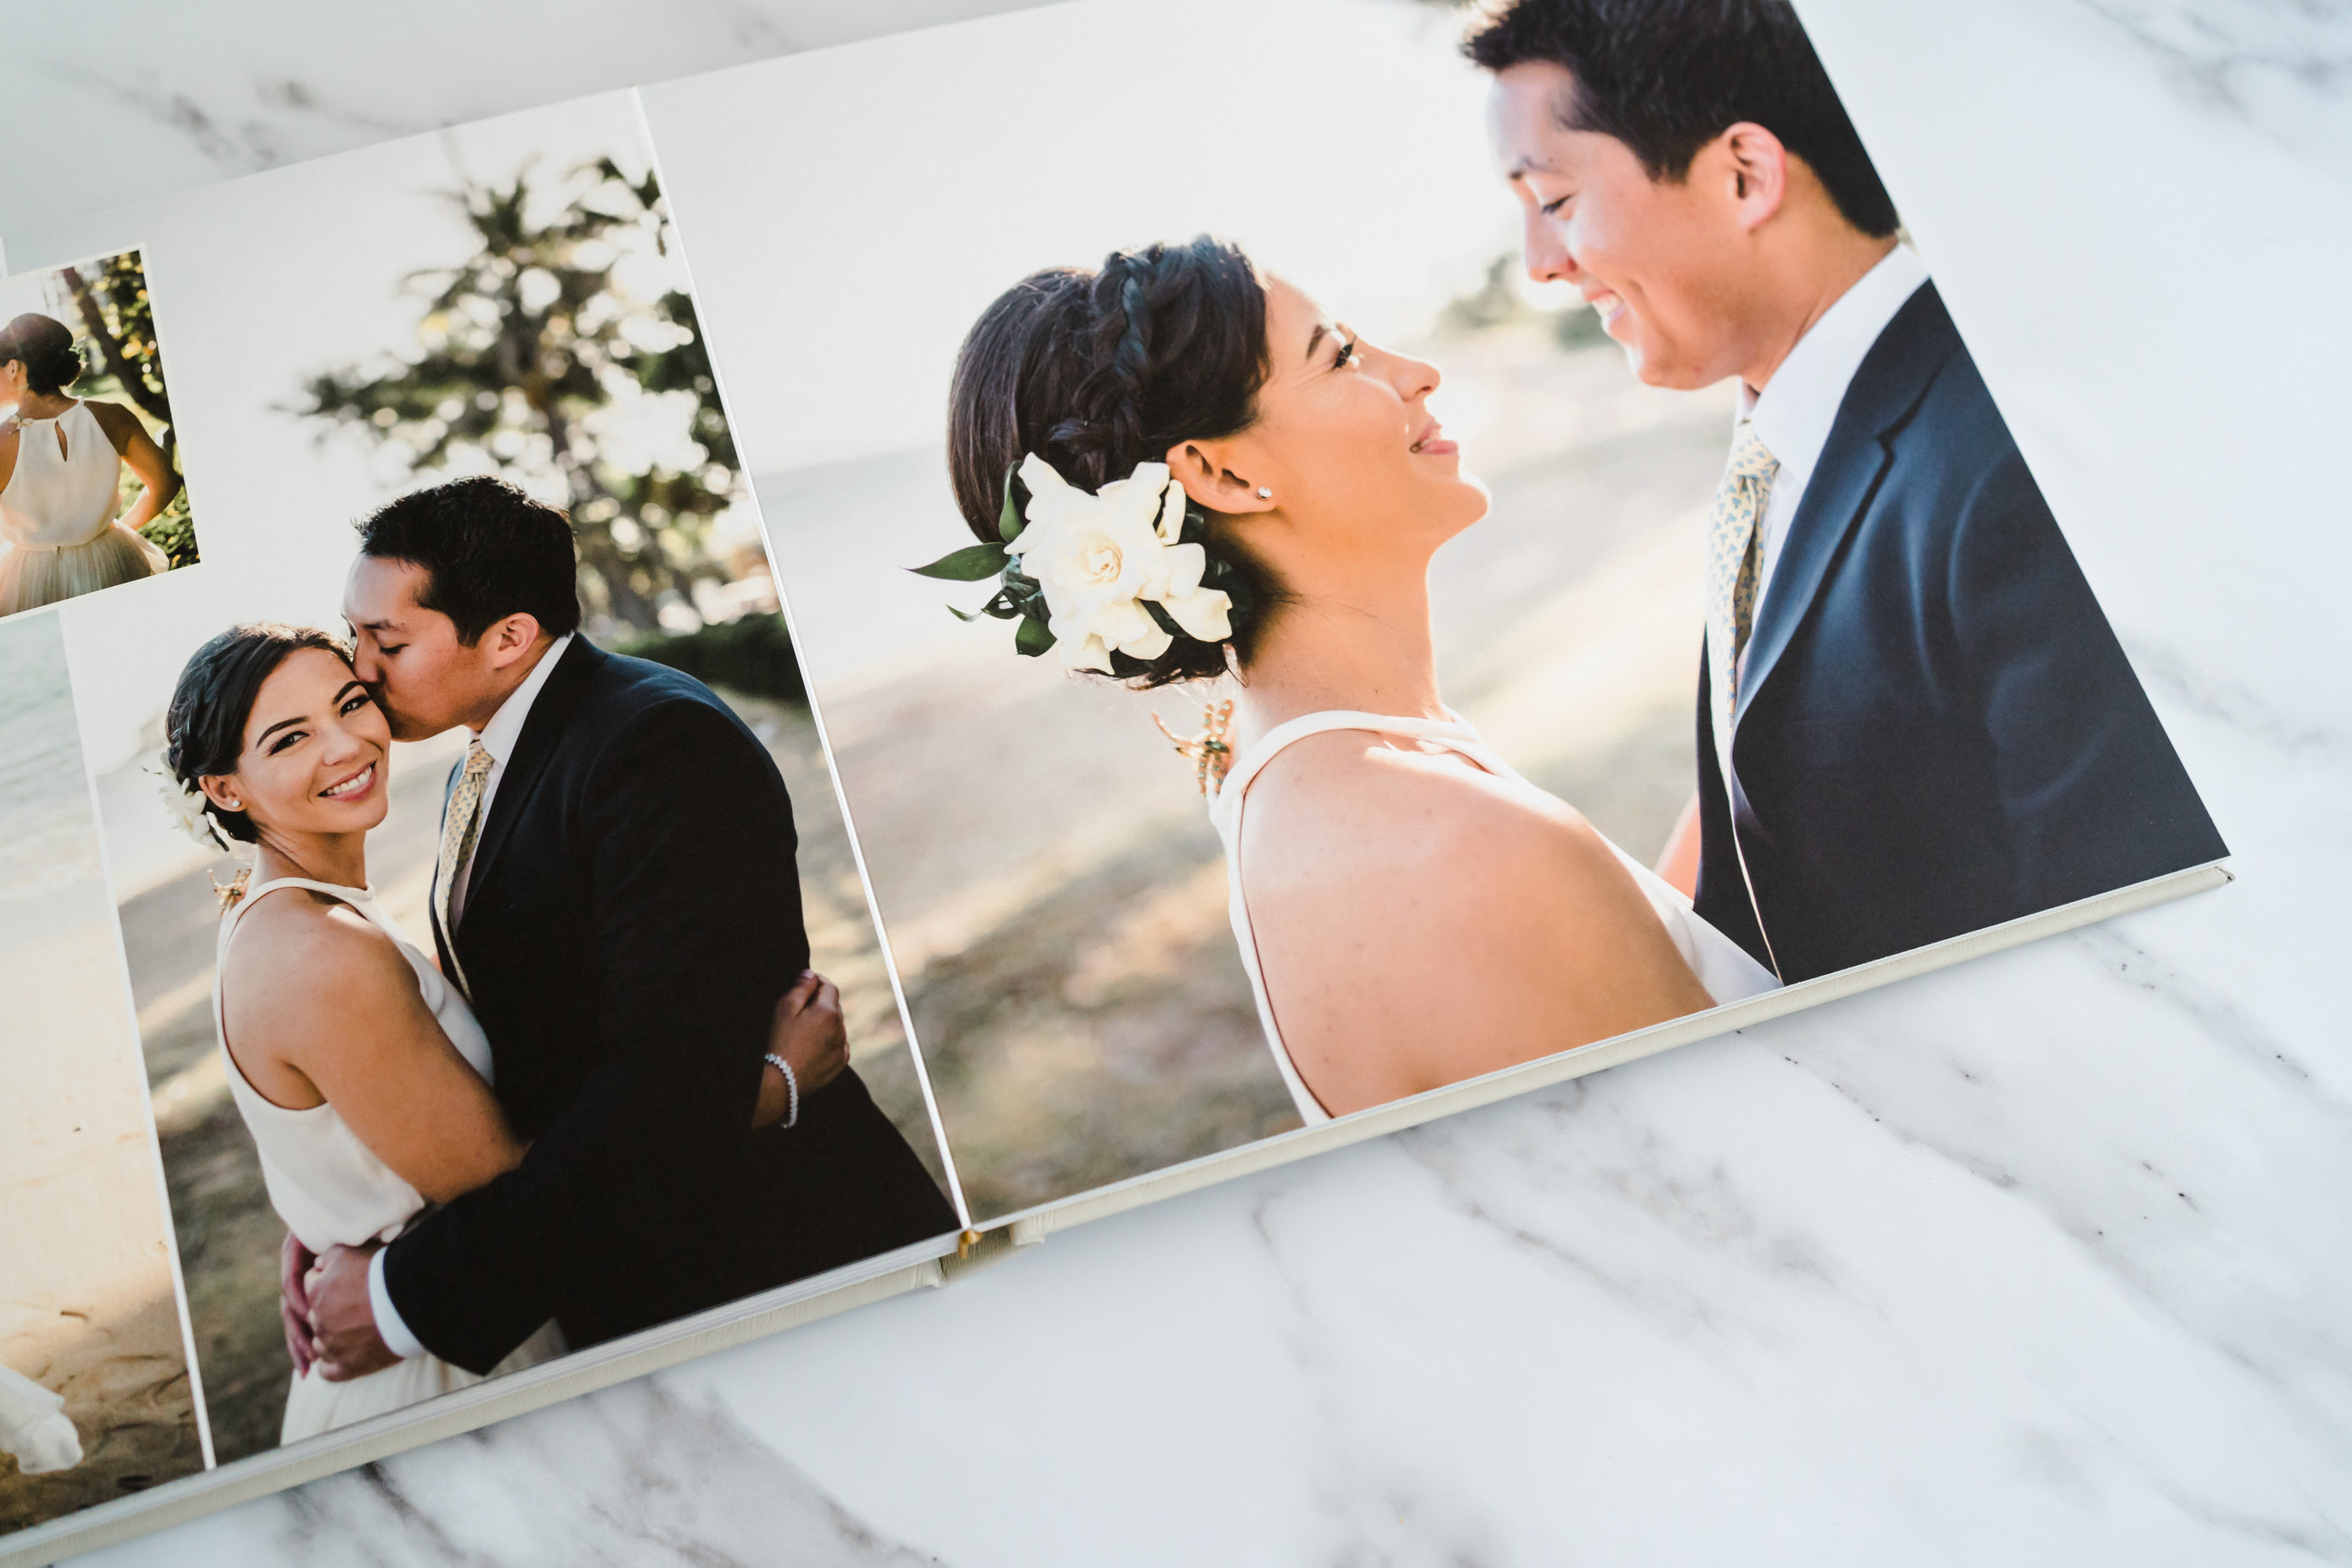 Best Wedding Photo Albums: A Perfect Gift Choice To Keep